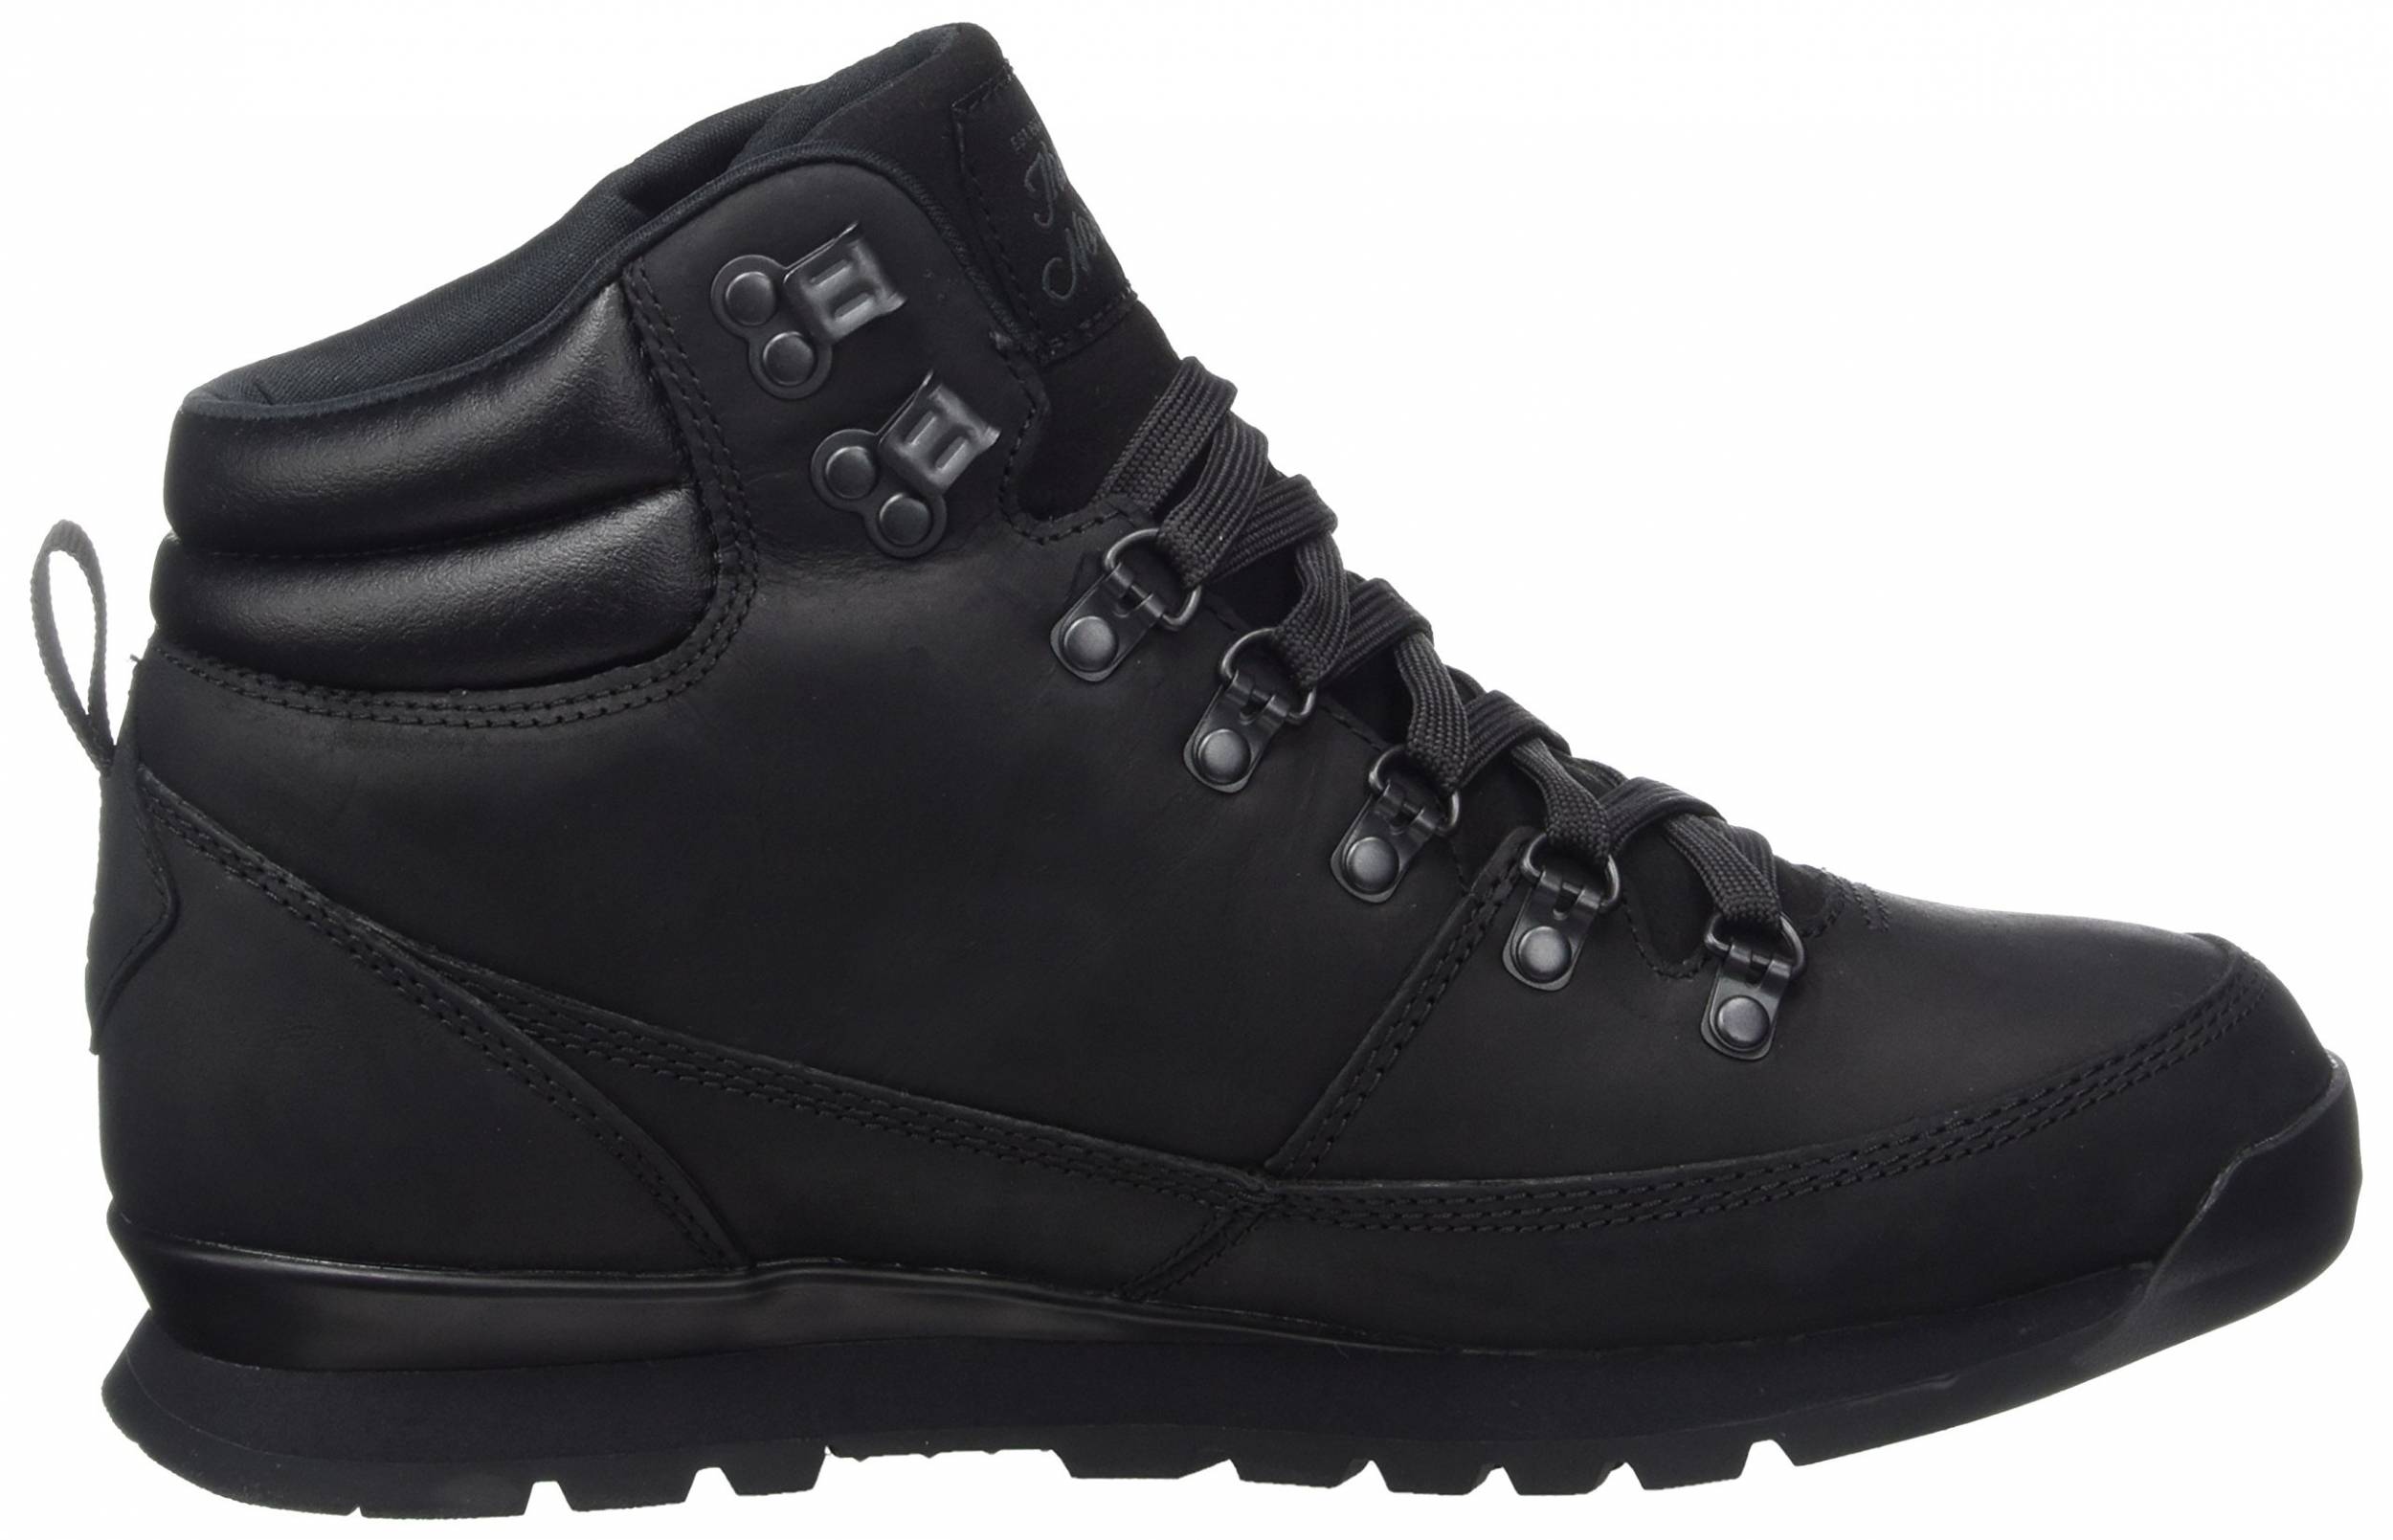 Save 25% on The North Face Hiking Boots 